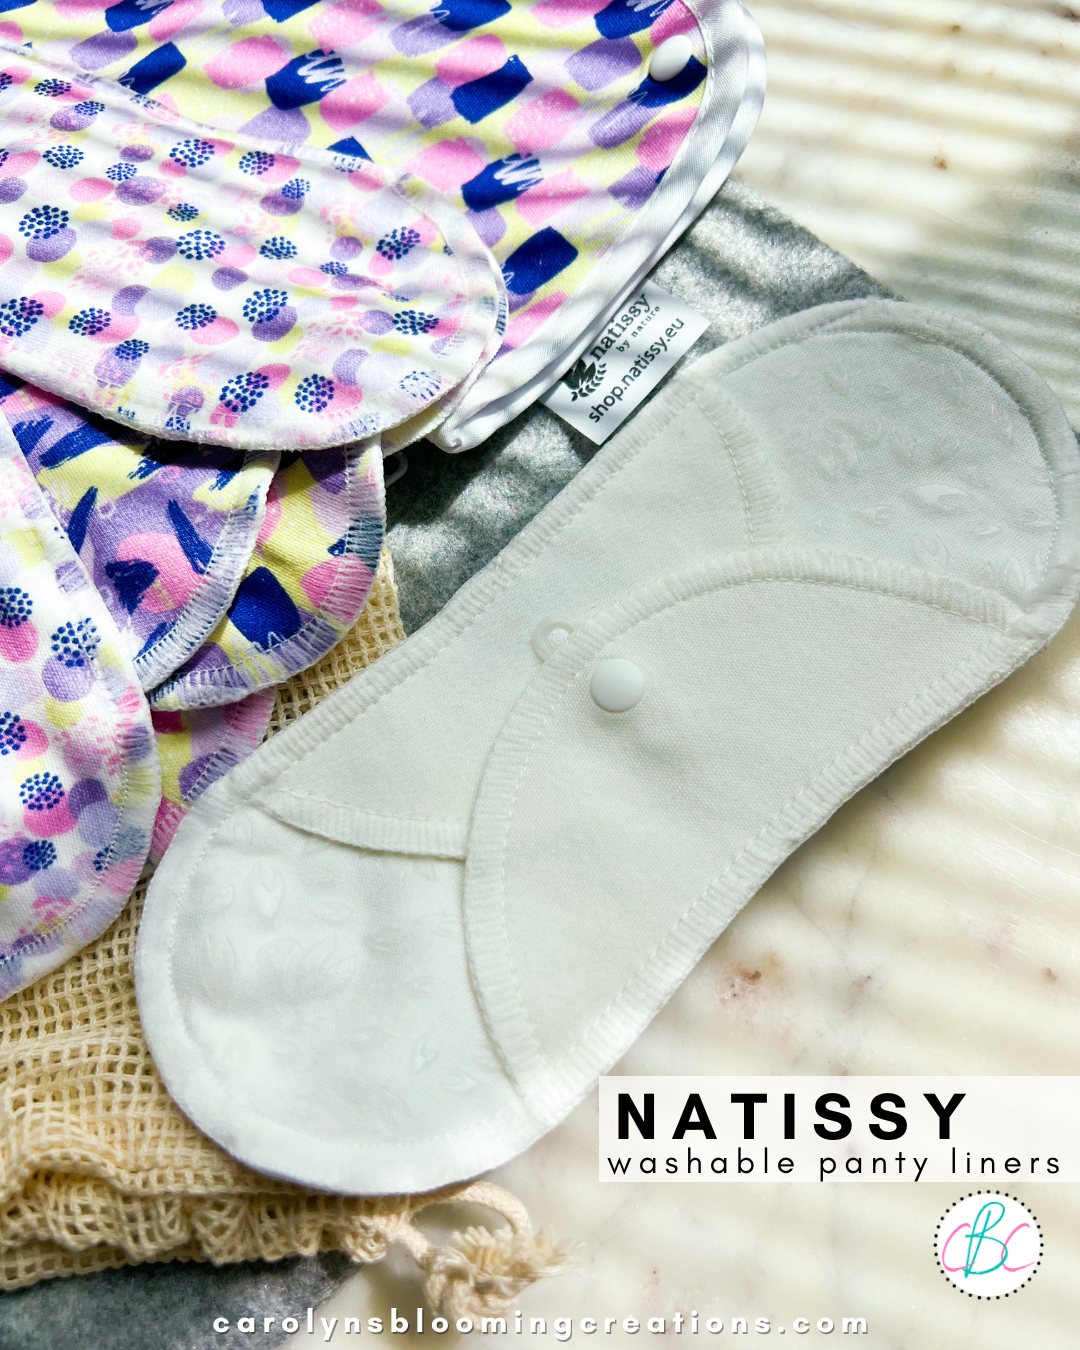 Natissy Washable Panty Liners